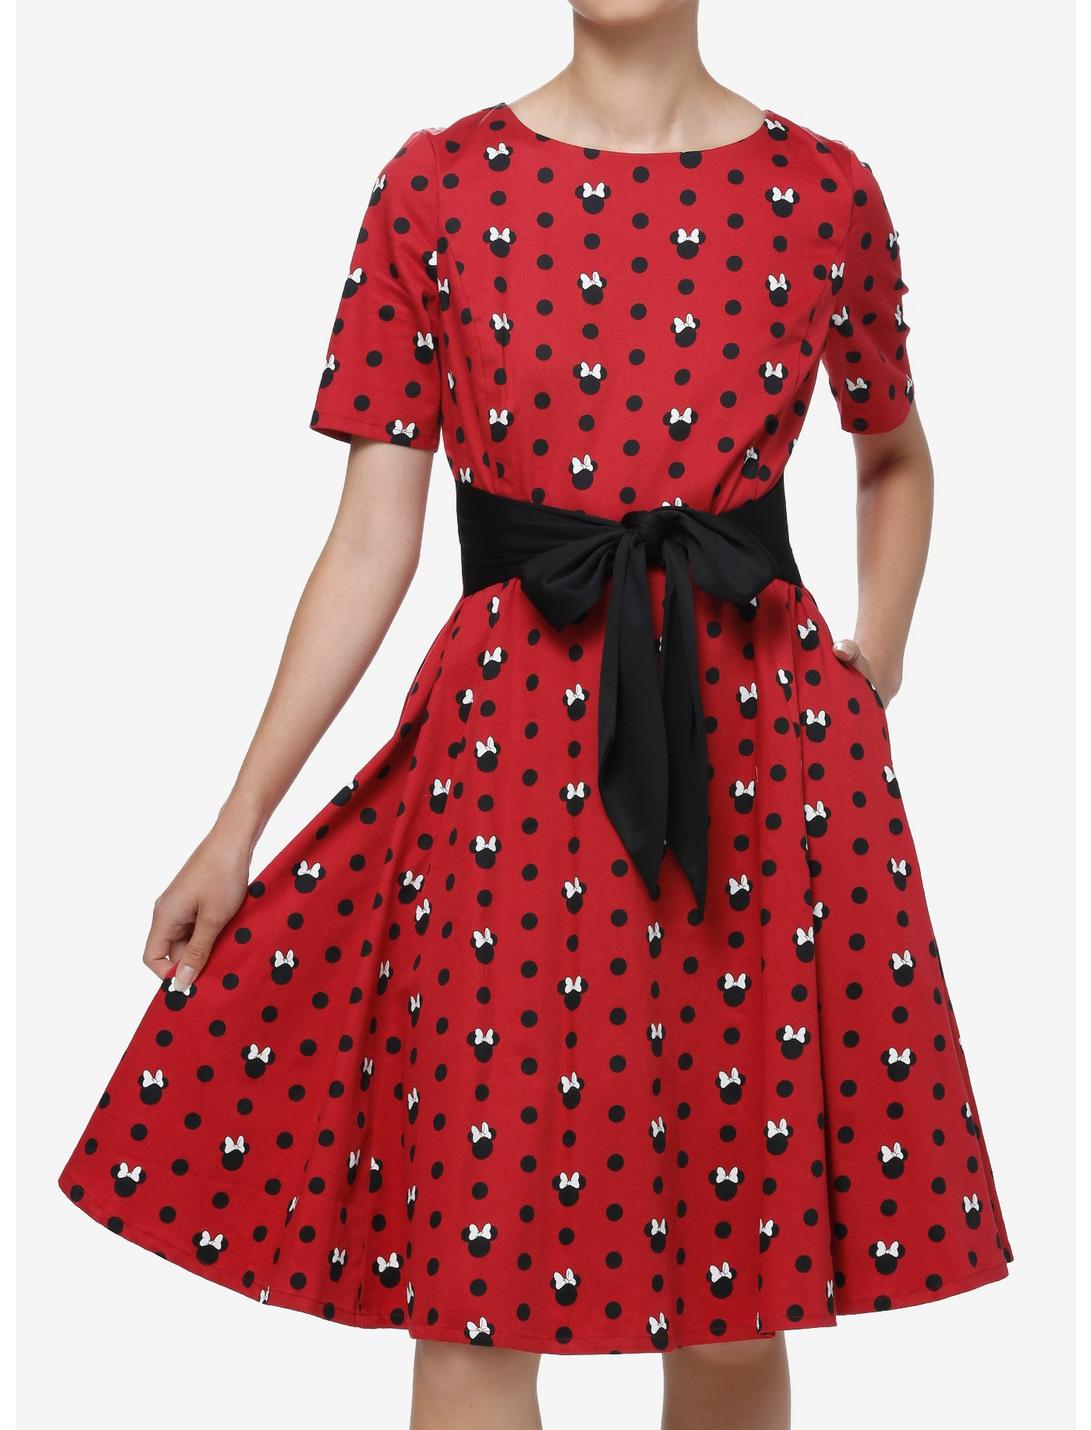 Her Universe Disney Minnie Mouse Polka Dot Retro Dress Her Universe Exclusive, MULTI, hi-res